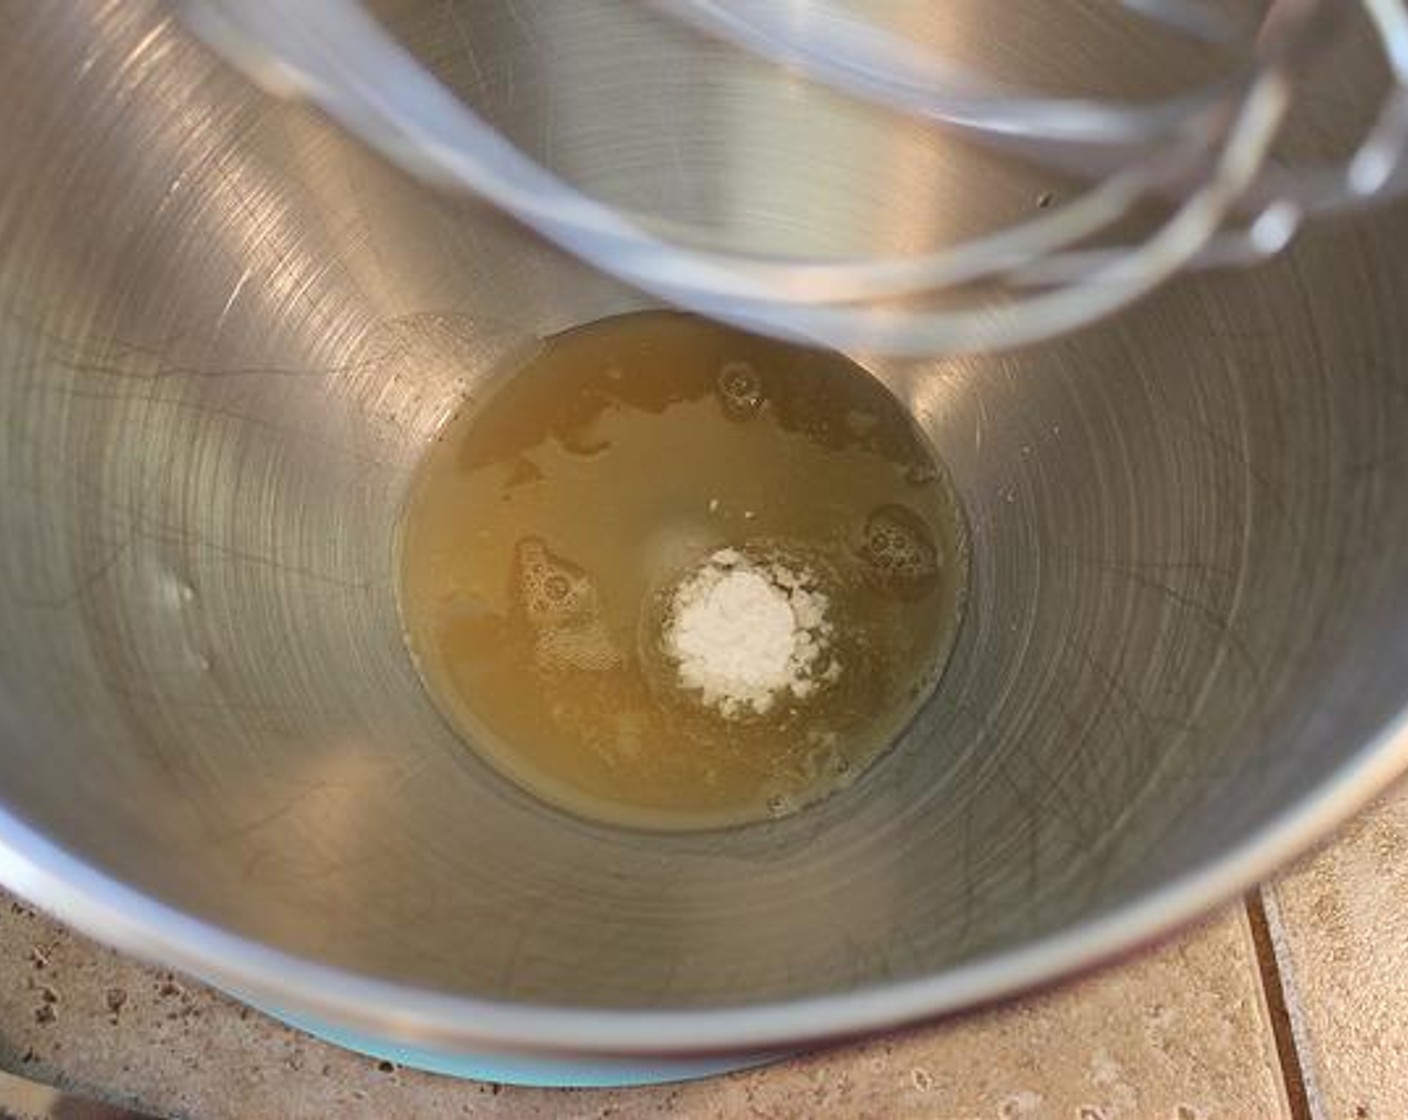 step 2 While Yeast is proofing, pour the Aquafaba (1/4 cup) along with the Cream of Tartar (1/2 tsp) into the clean & dry bowl of your stand mixer fitted with the whisk attachment.